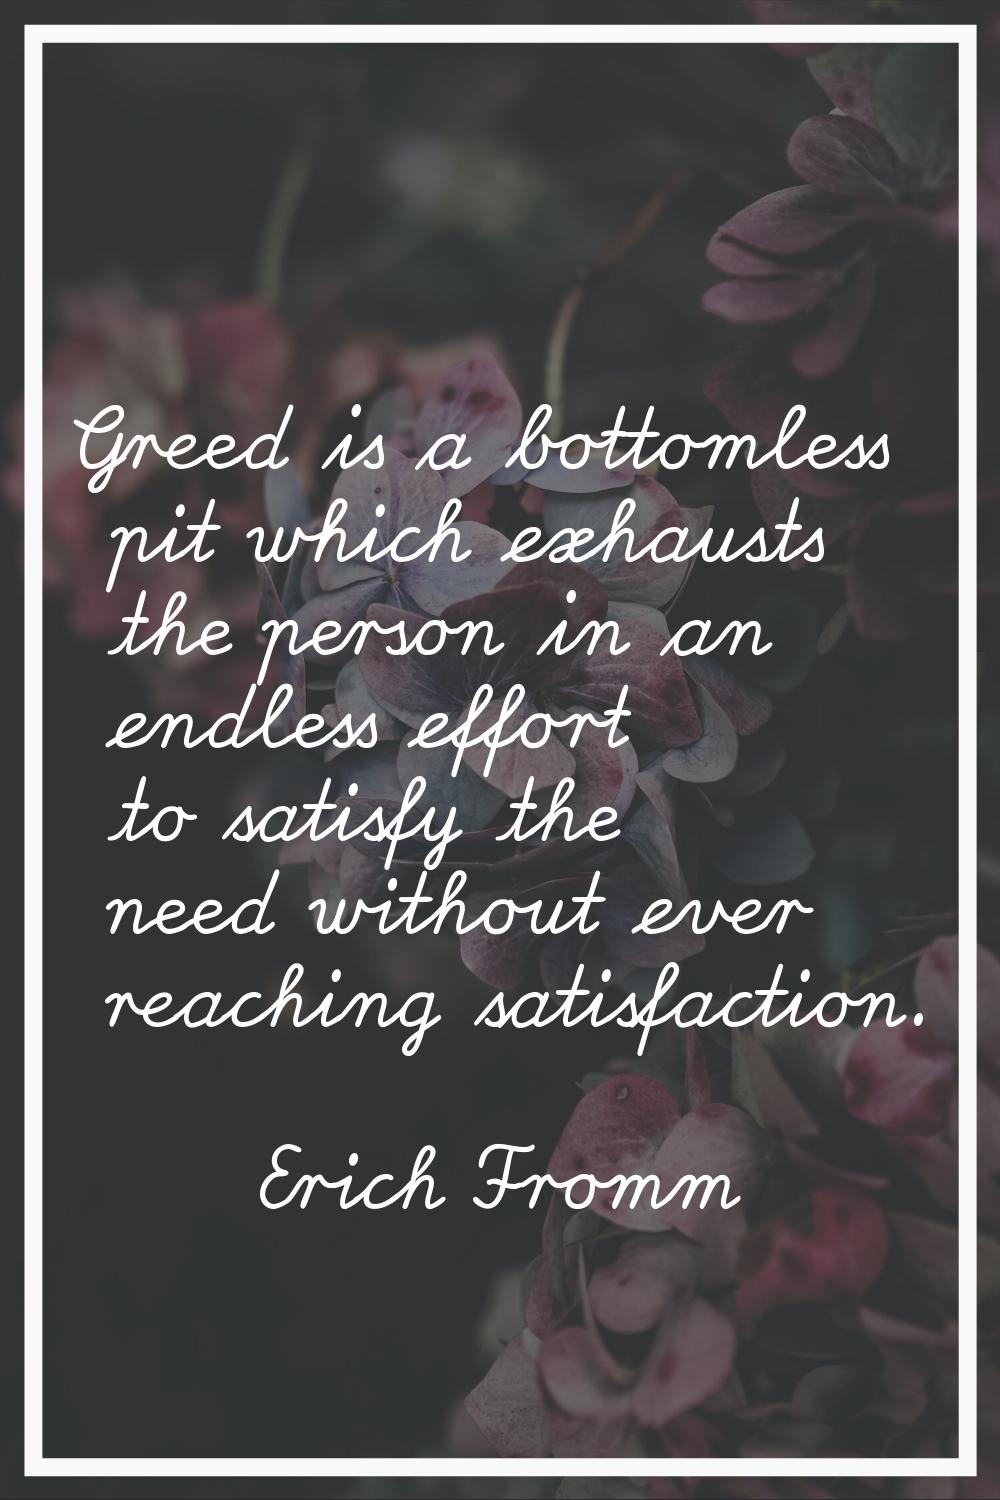 Greed is a bottomless pit which exhausts the person in an endless effort to satisfy the need withou